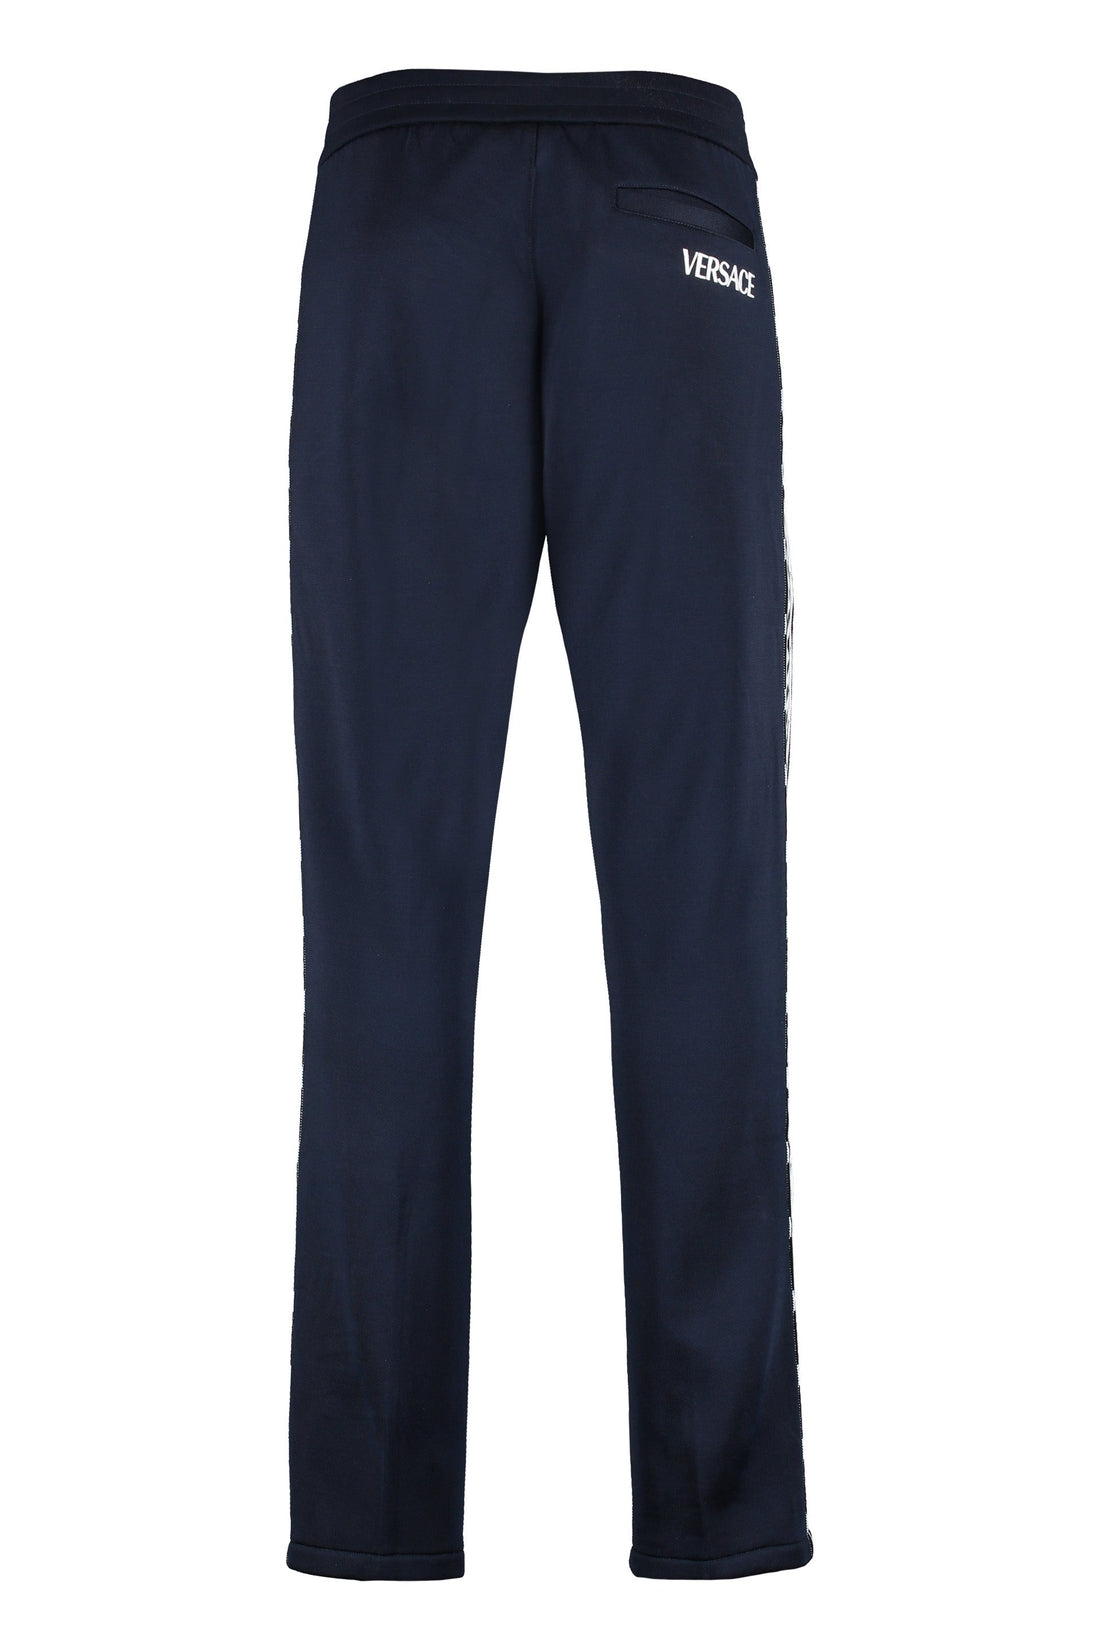 Versace-OUTLET-SALE-Track-pants with contrasting side stripes-ARCHIVIST